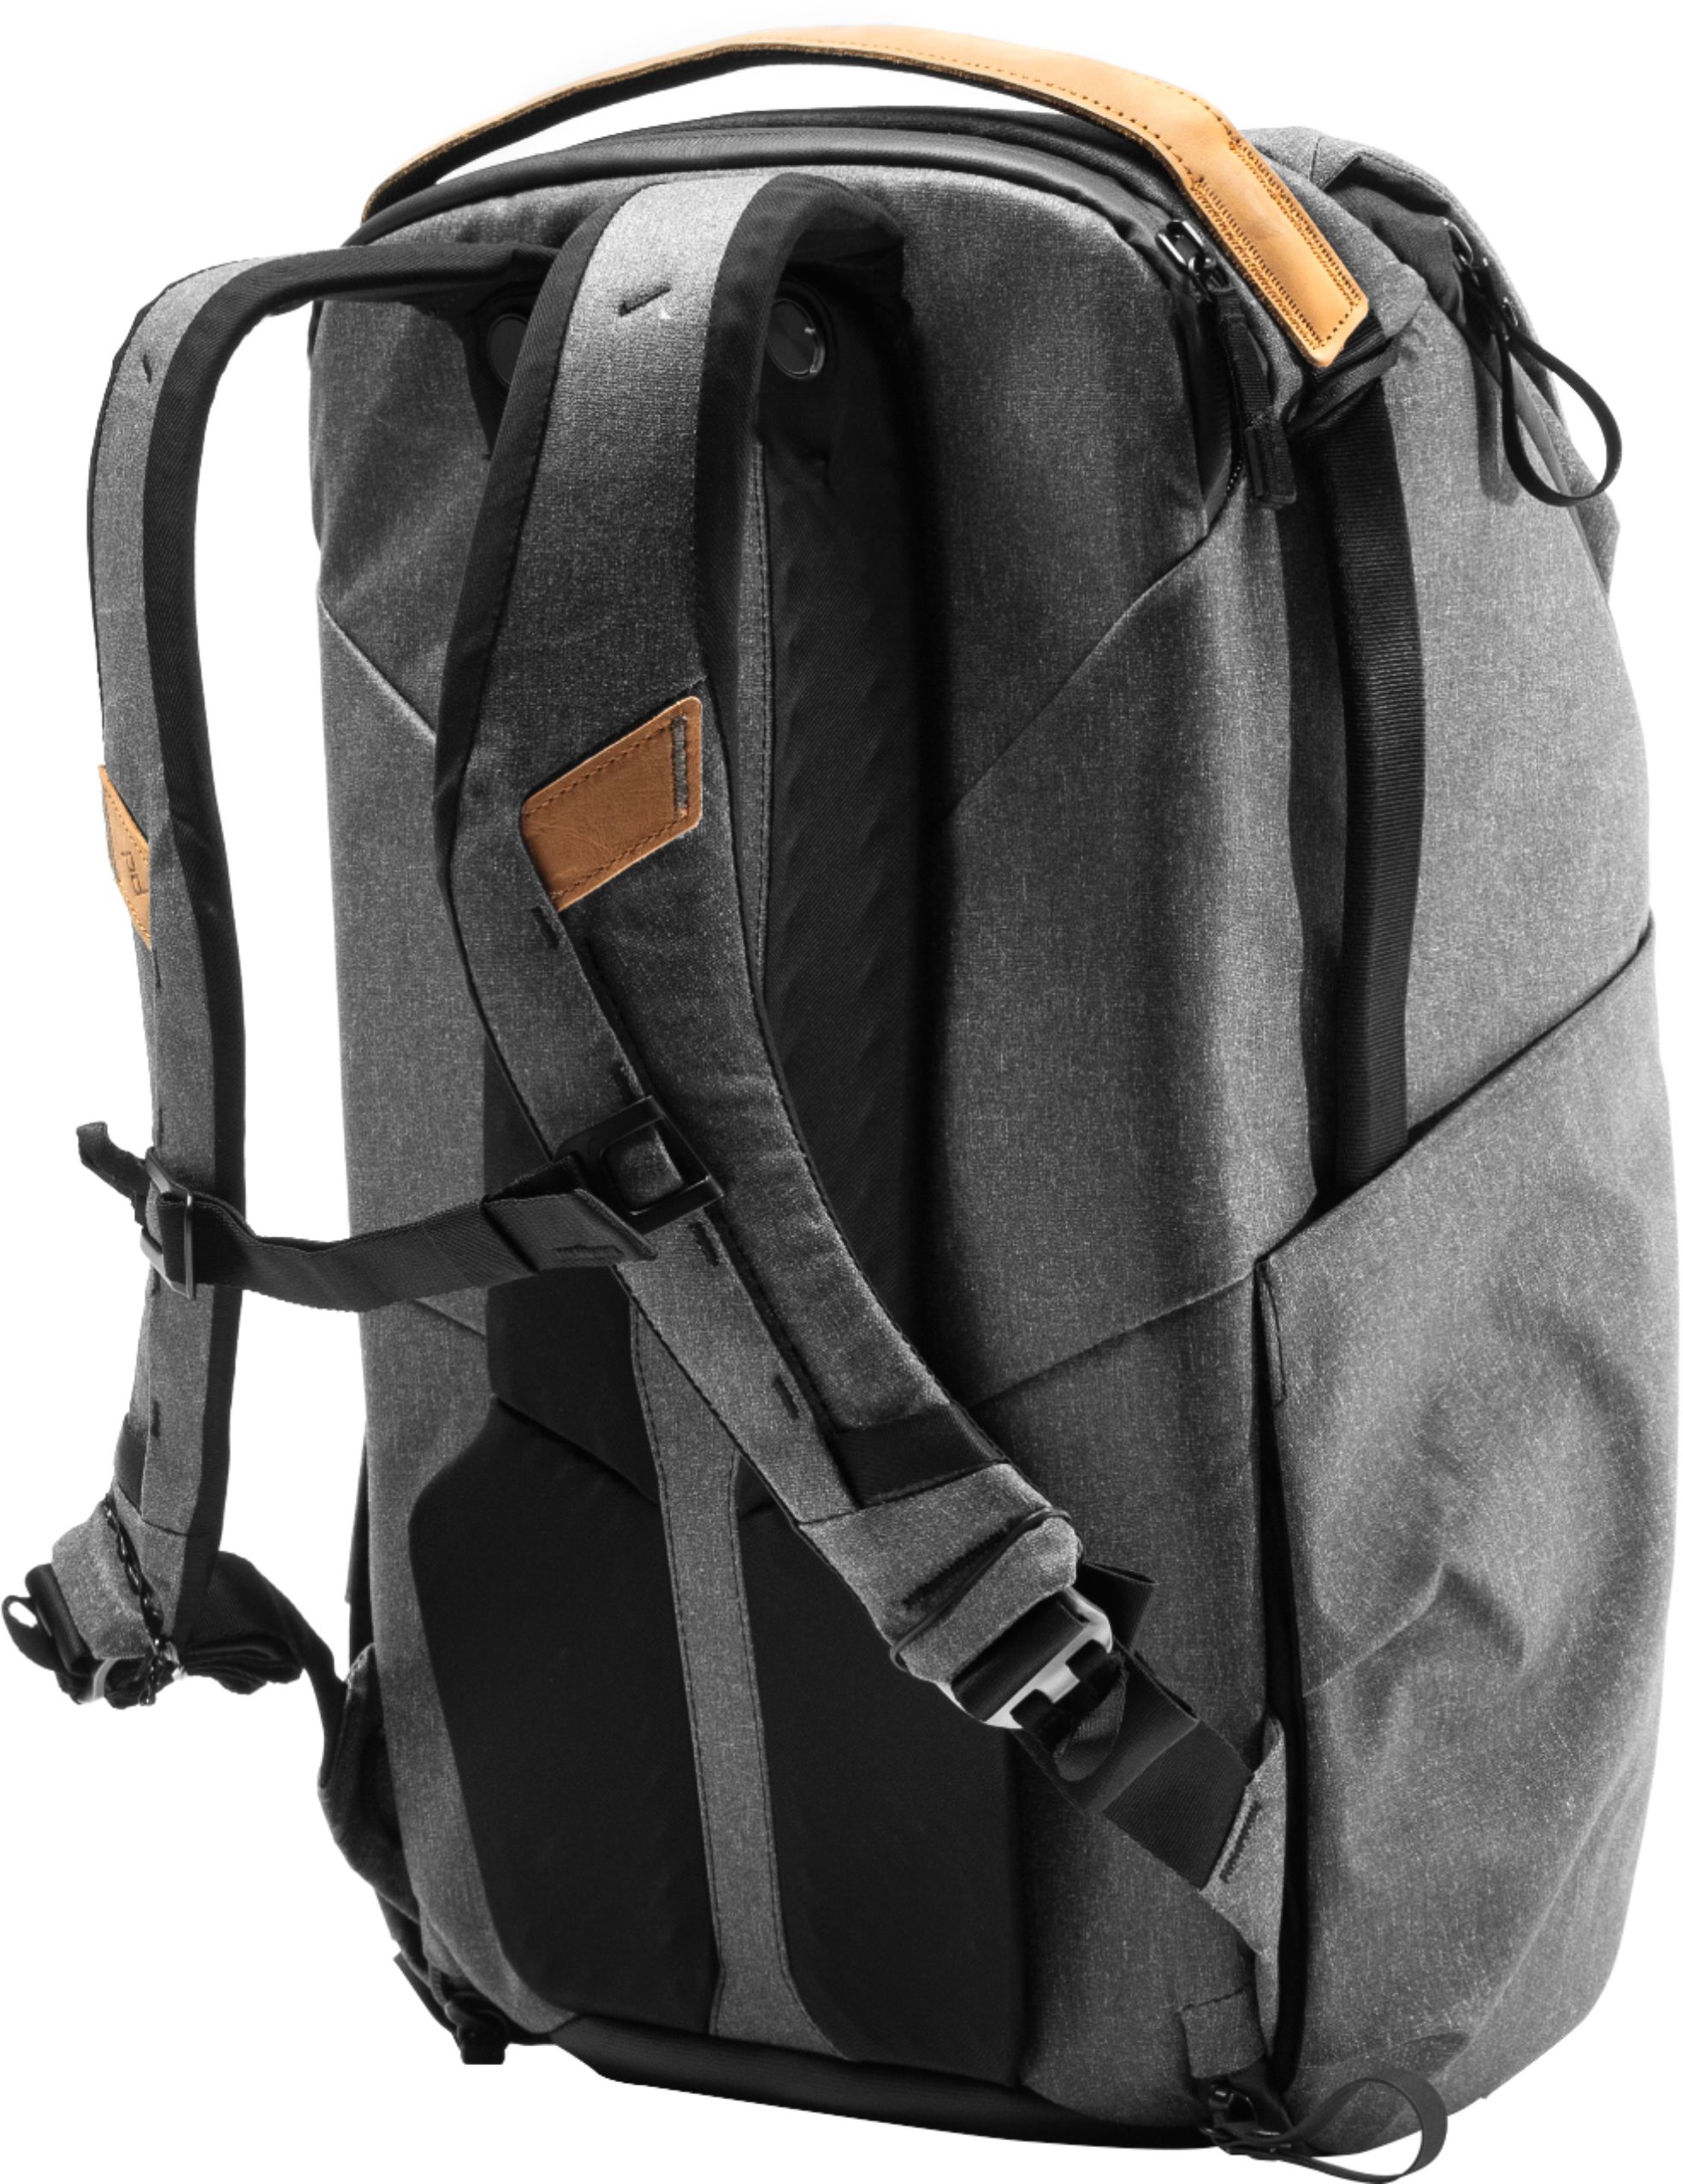 Lowepro LP 133 Backpack 9 x 15 x 5 Inches w/ Crossbody Strap and Rain  Cover